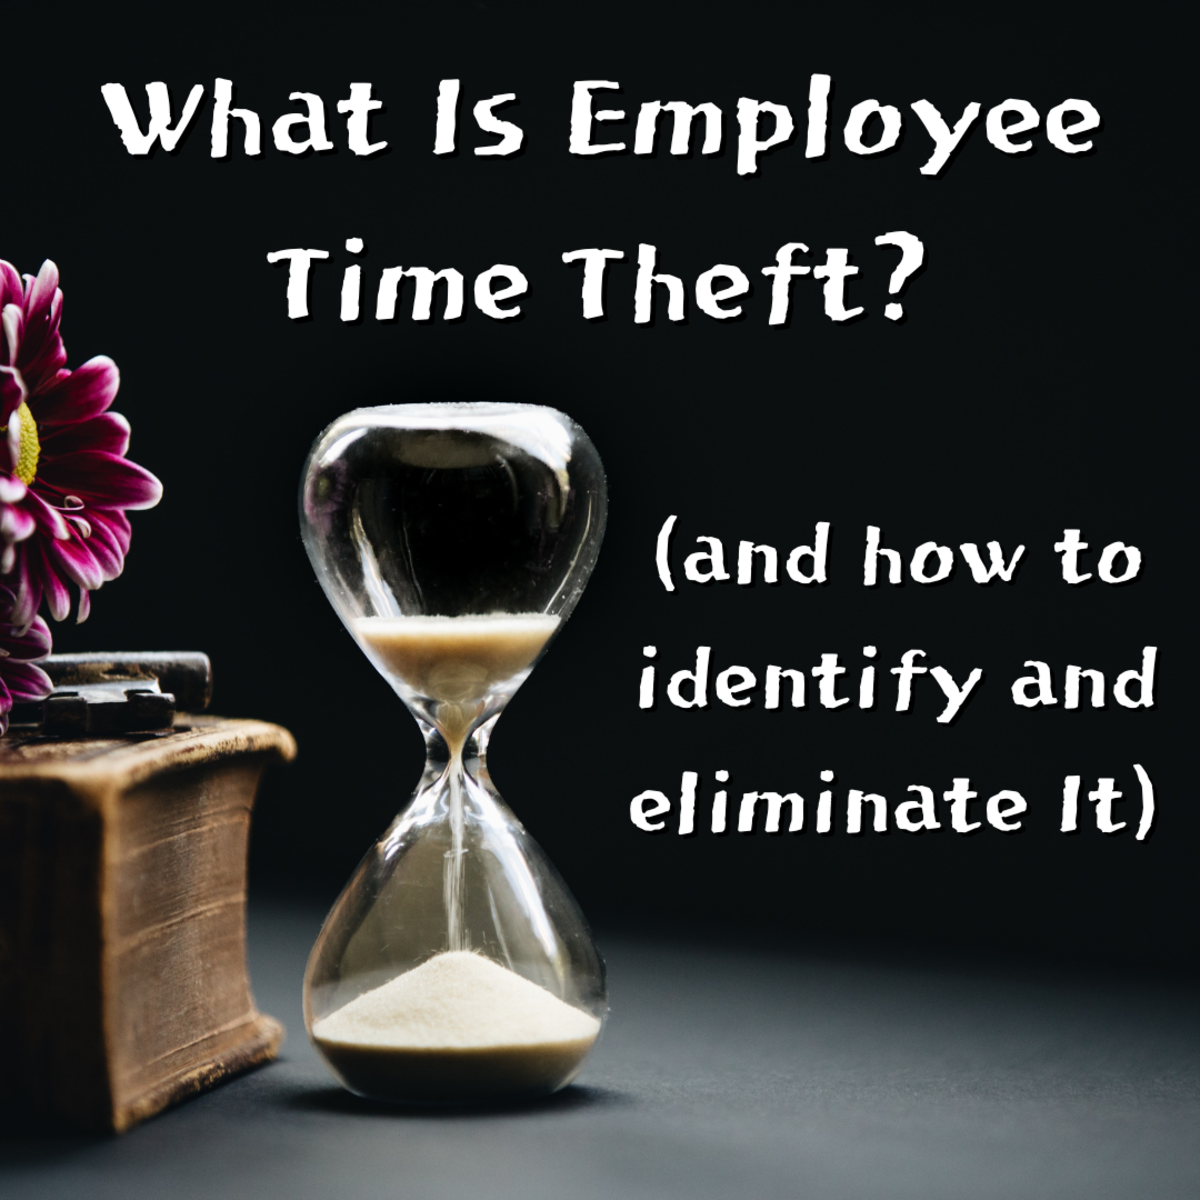 Read on to learn what employee time theft is, as well as various ways to identify it and how it might be eliminated. Finally there is an explanation of wage theft.